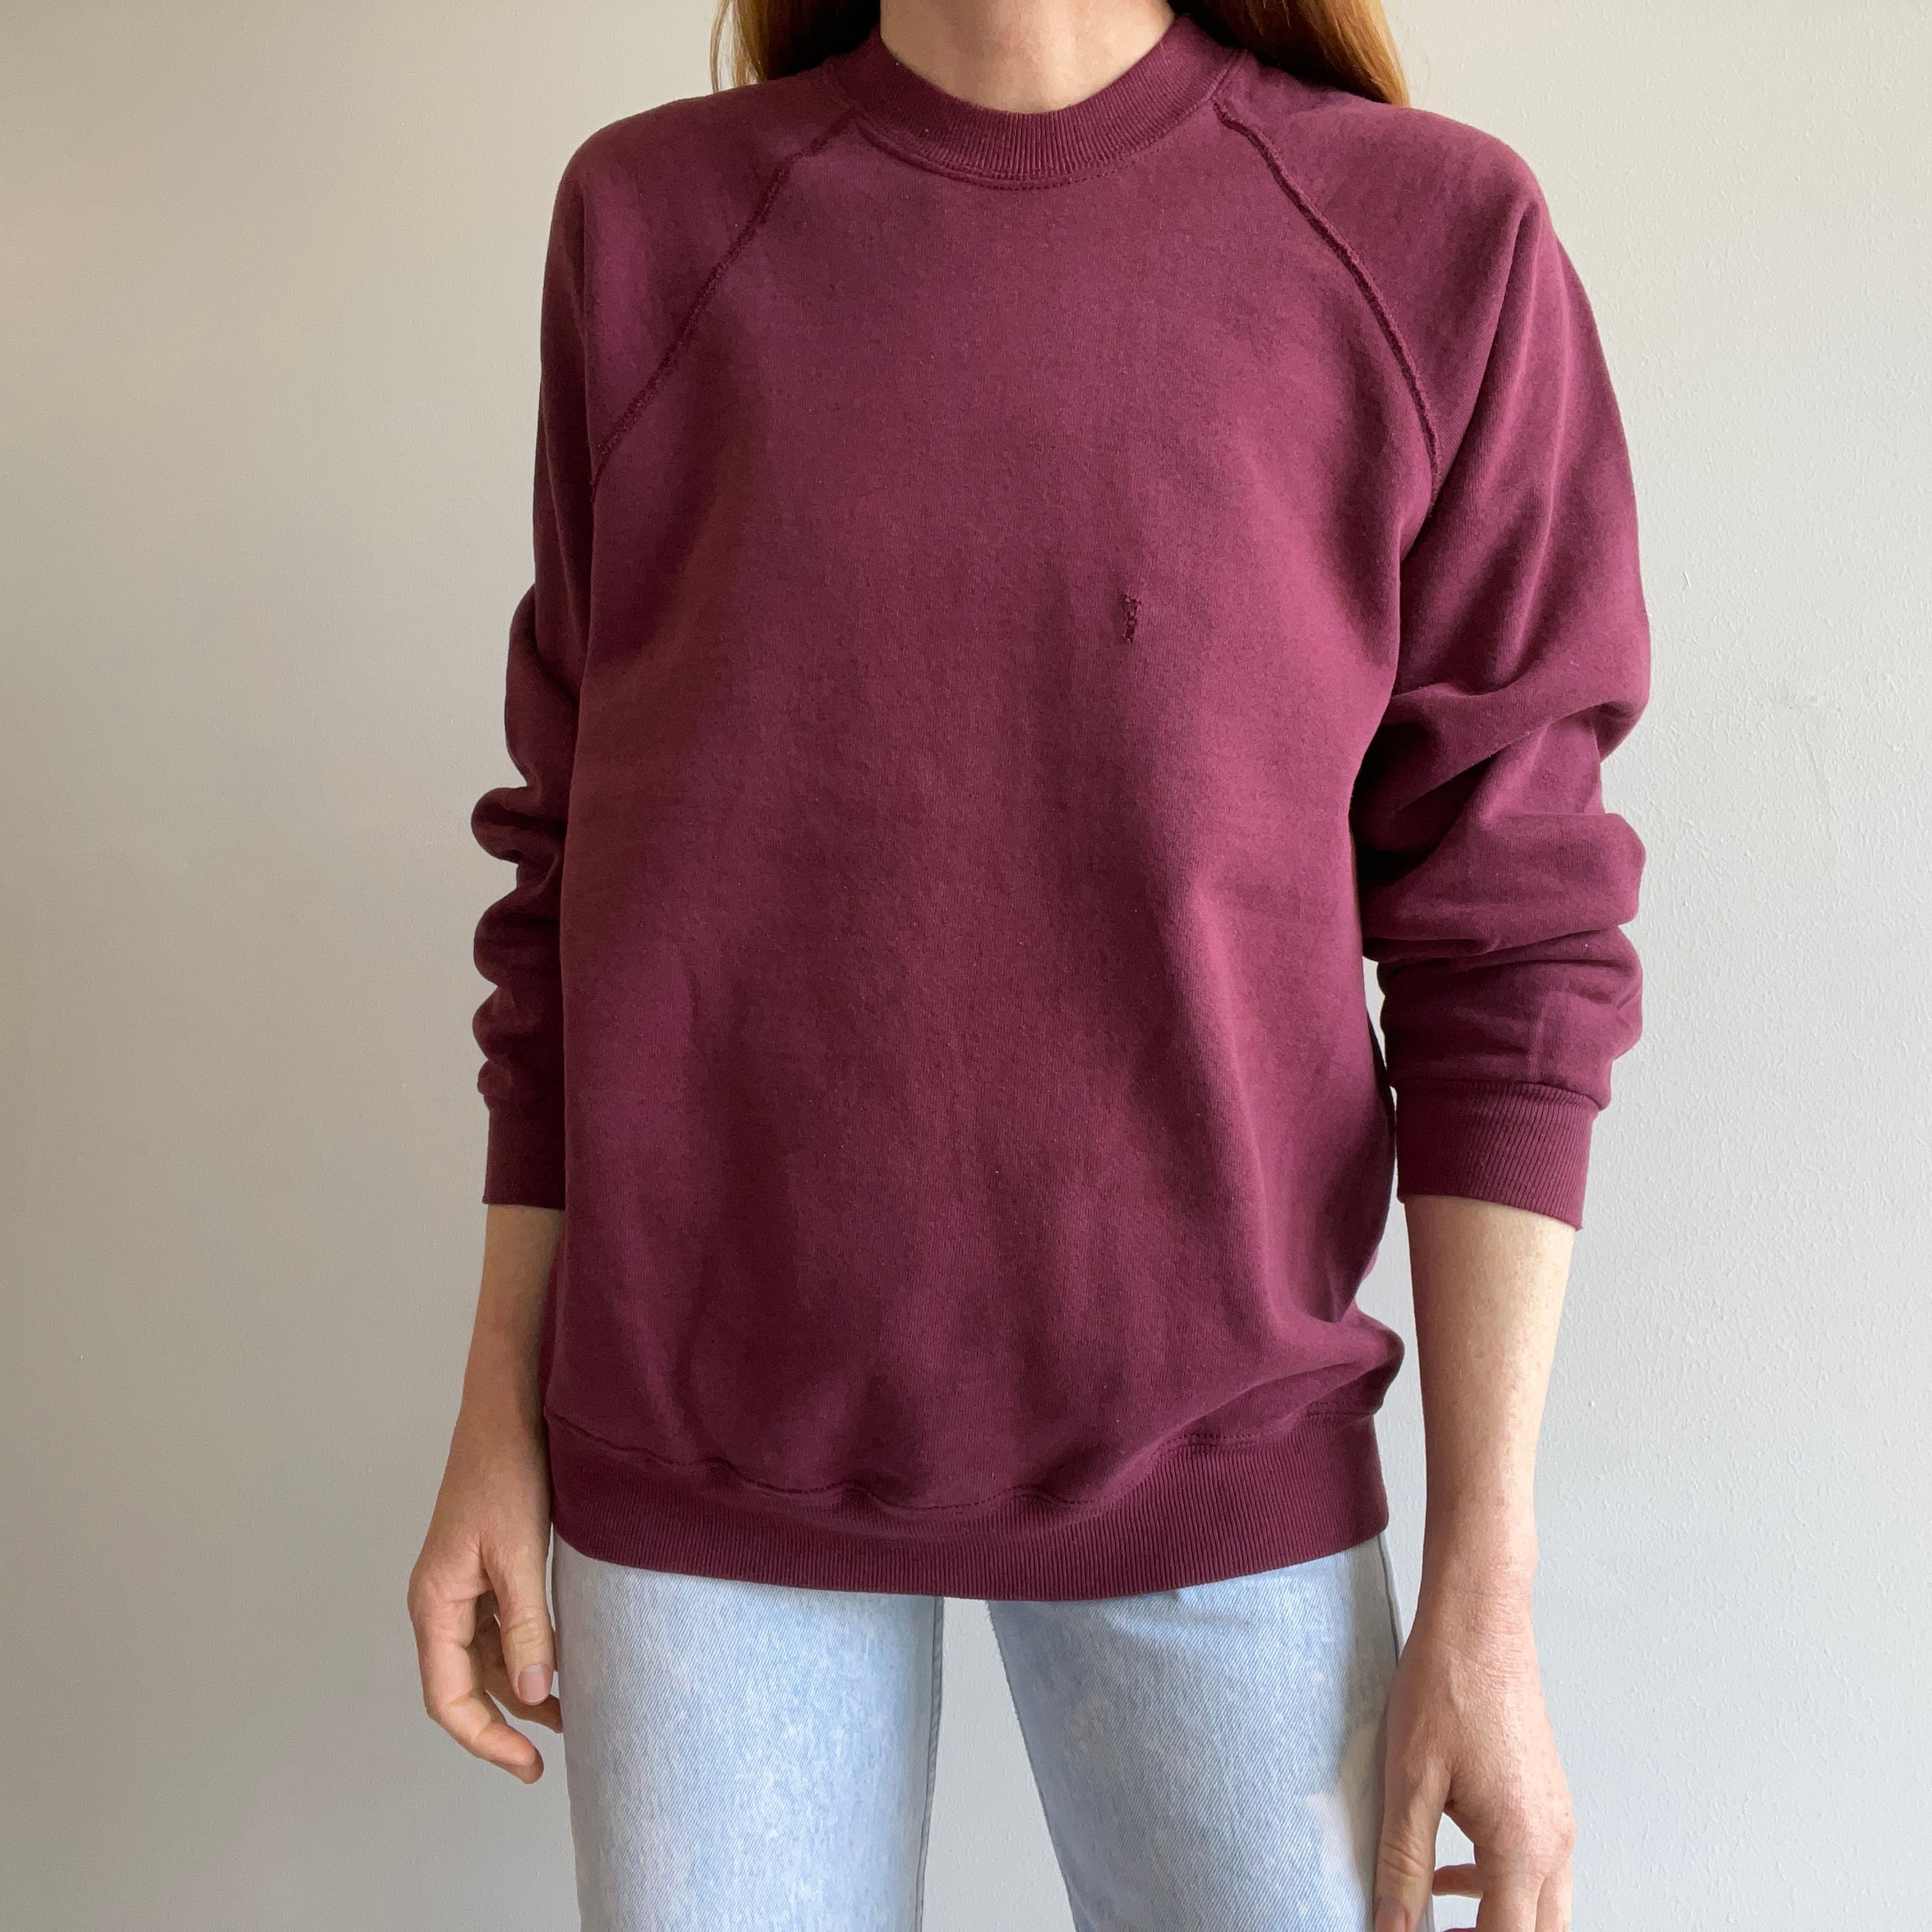 1980/90s Faded and Nicely Thrashed Blank Burgundy Raglan by Riders